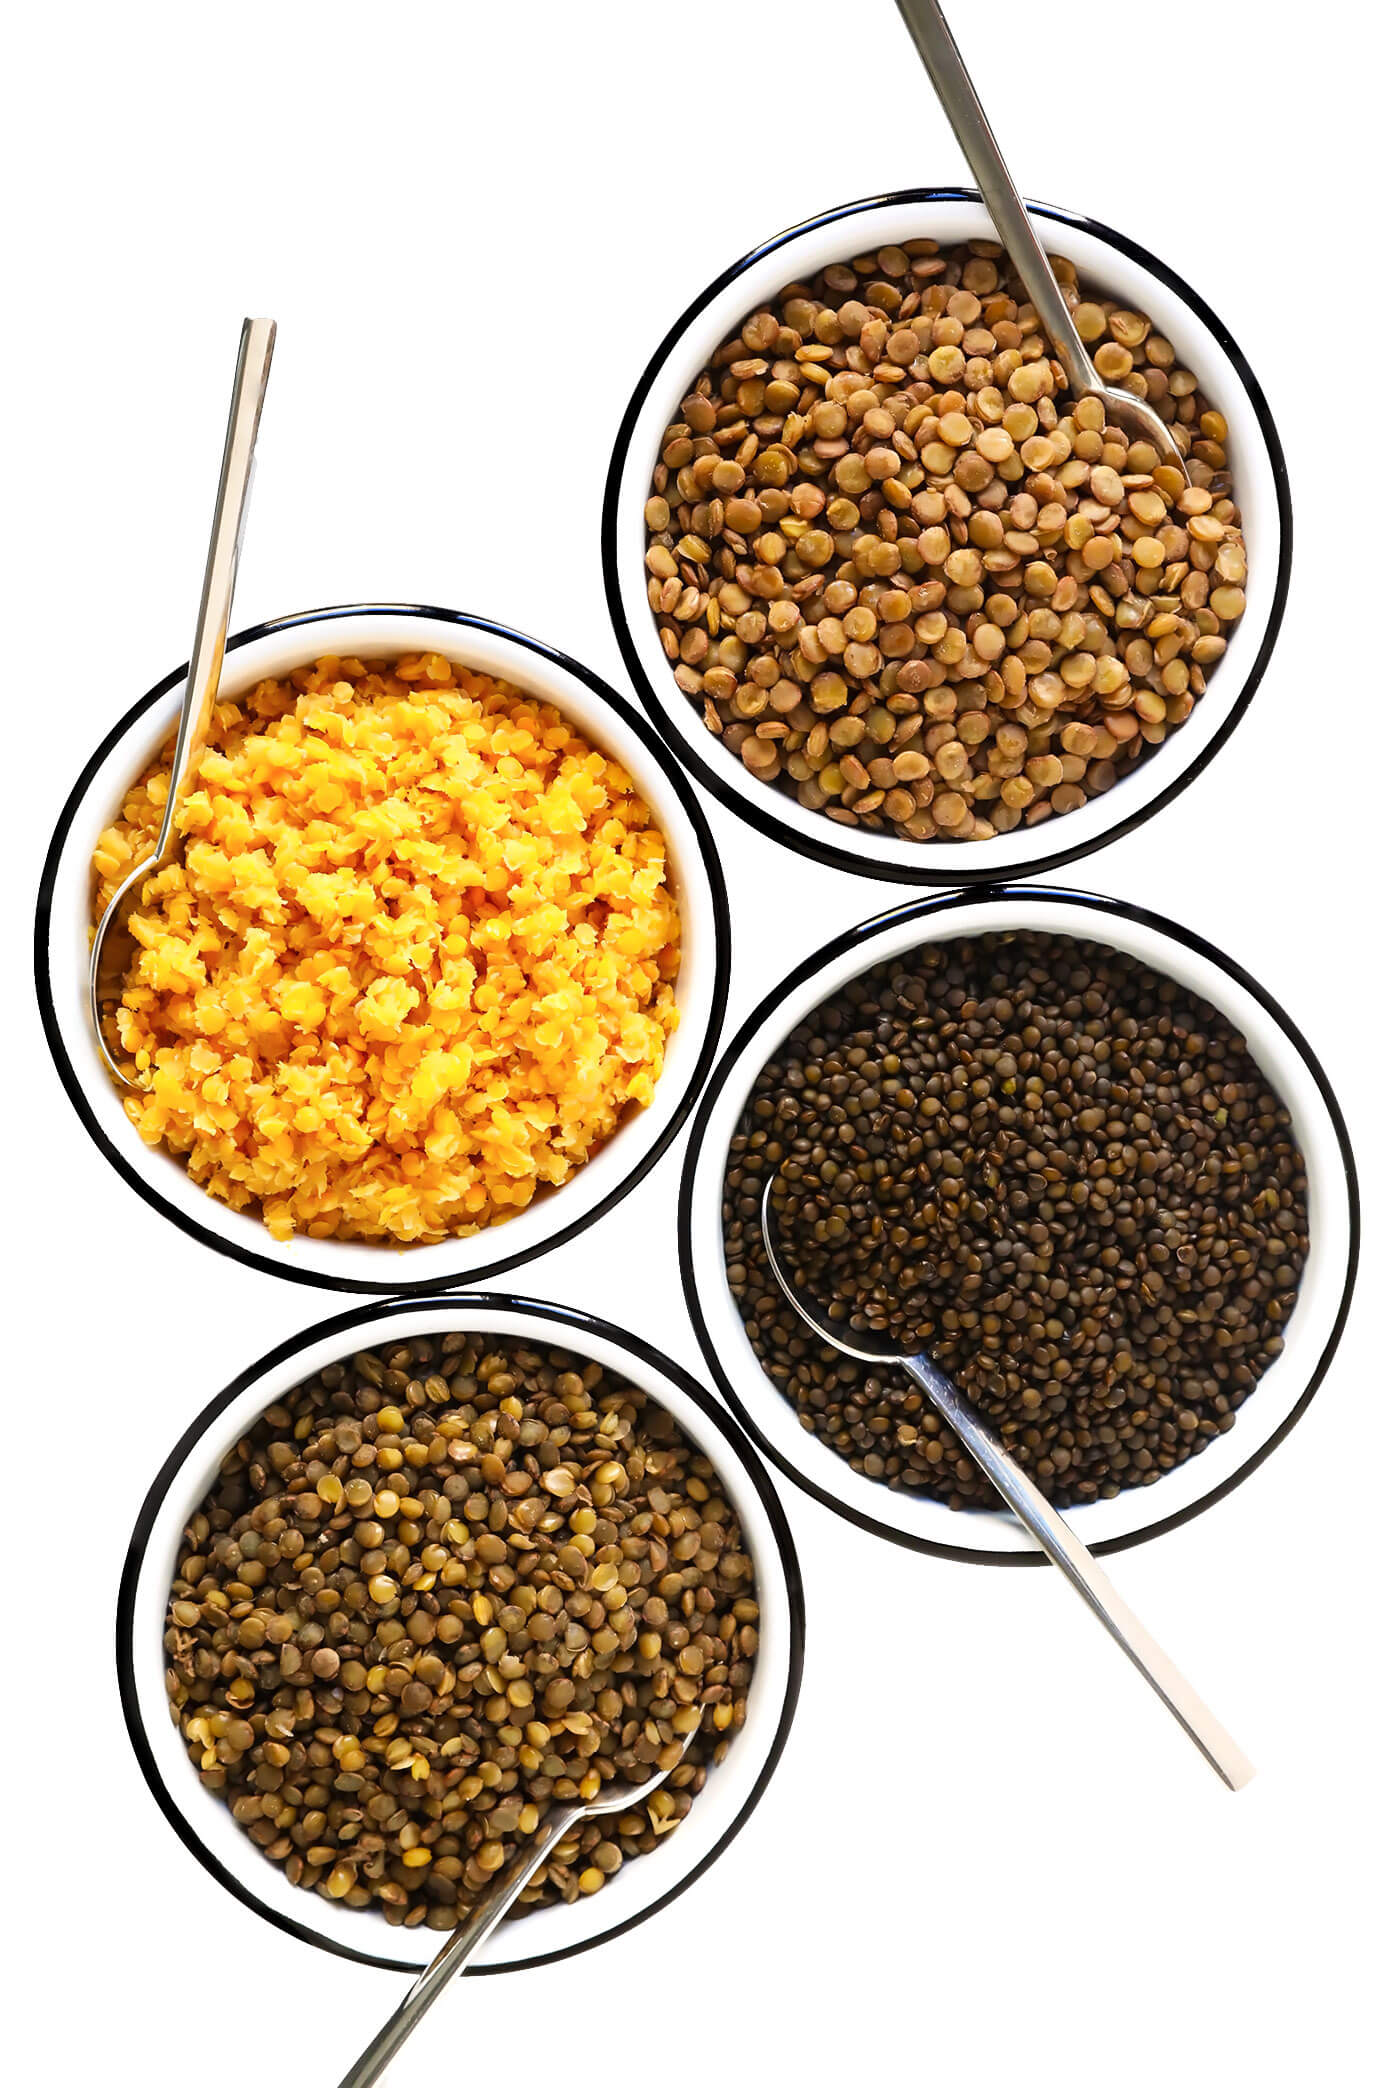 How To Cook Lentils (Red, Black, Brown, Green, or French Lentils)